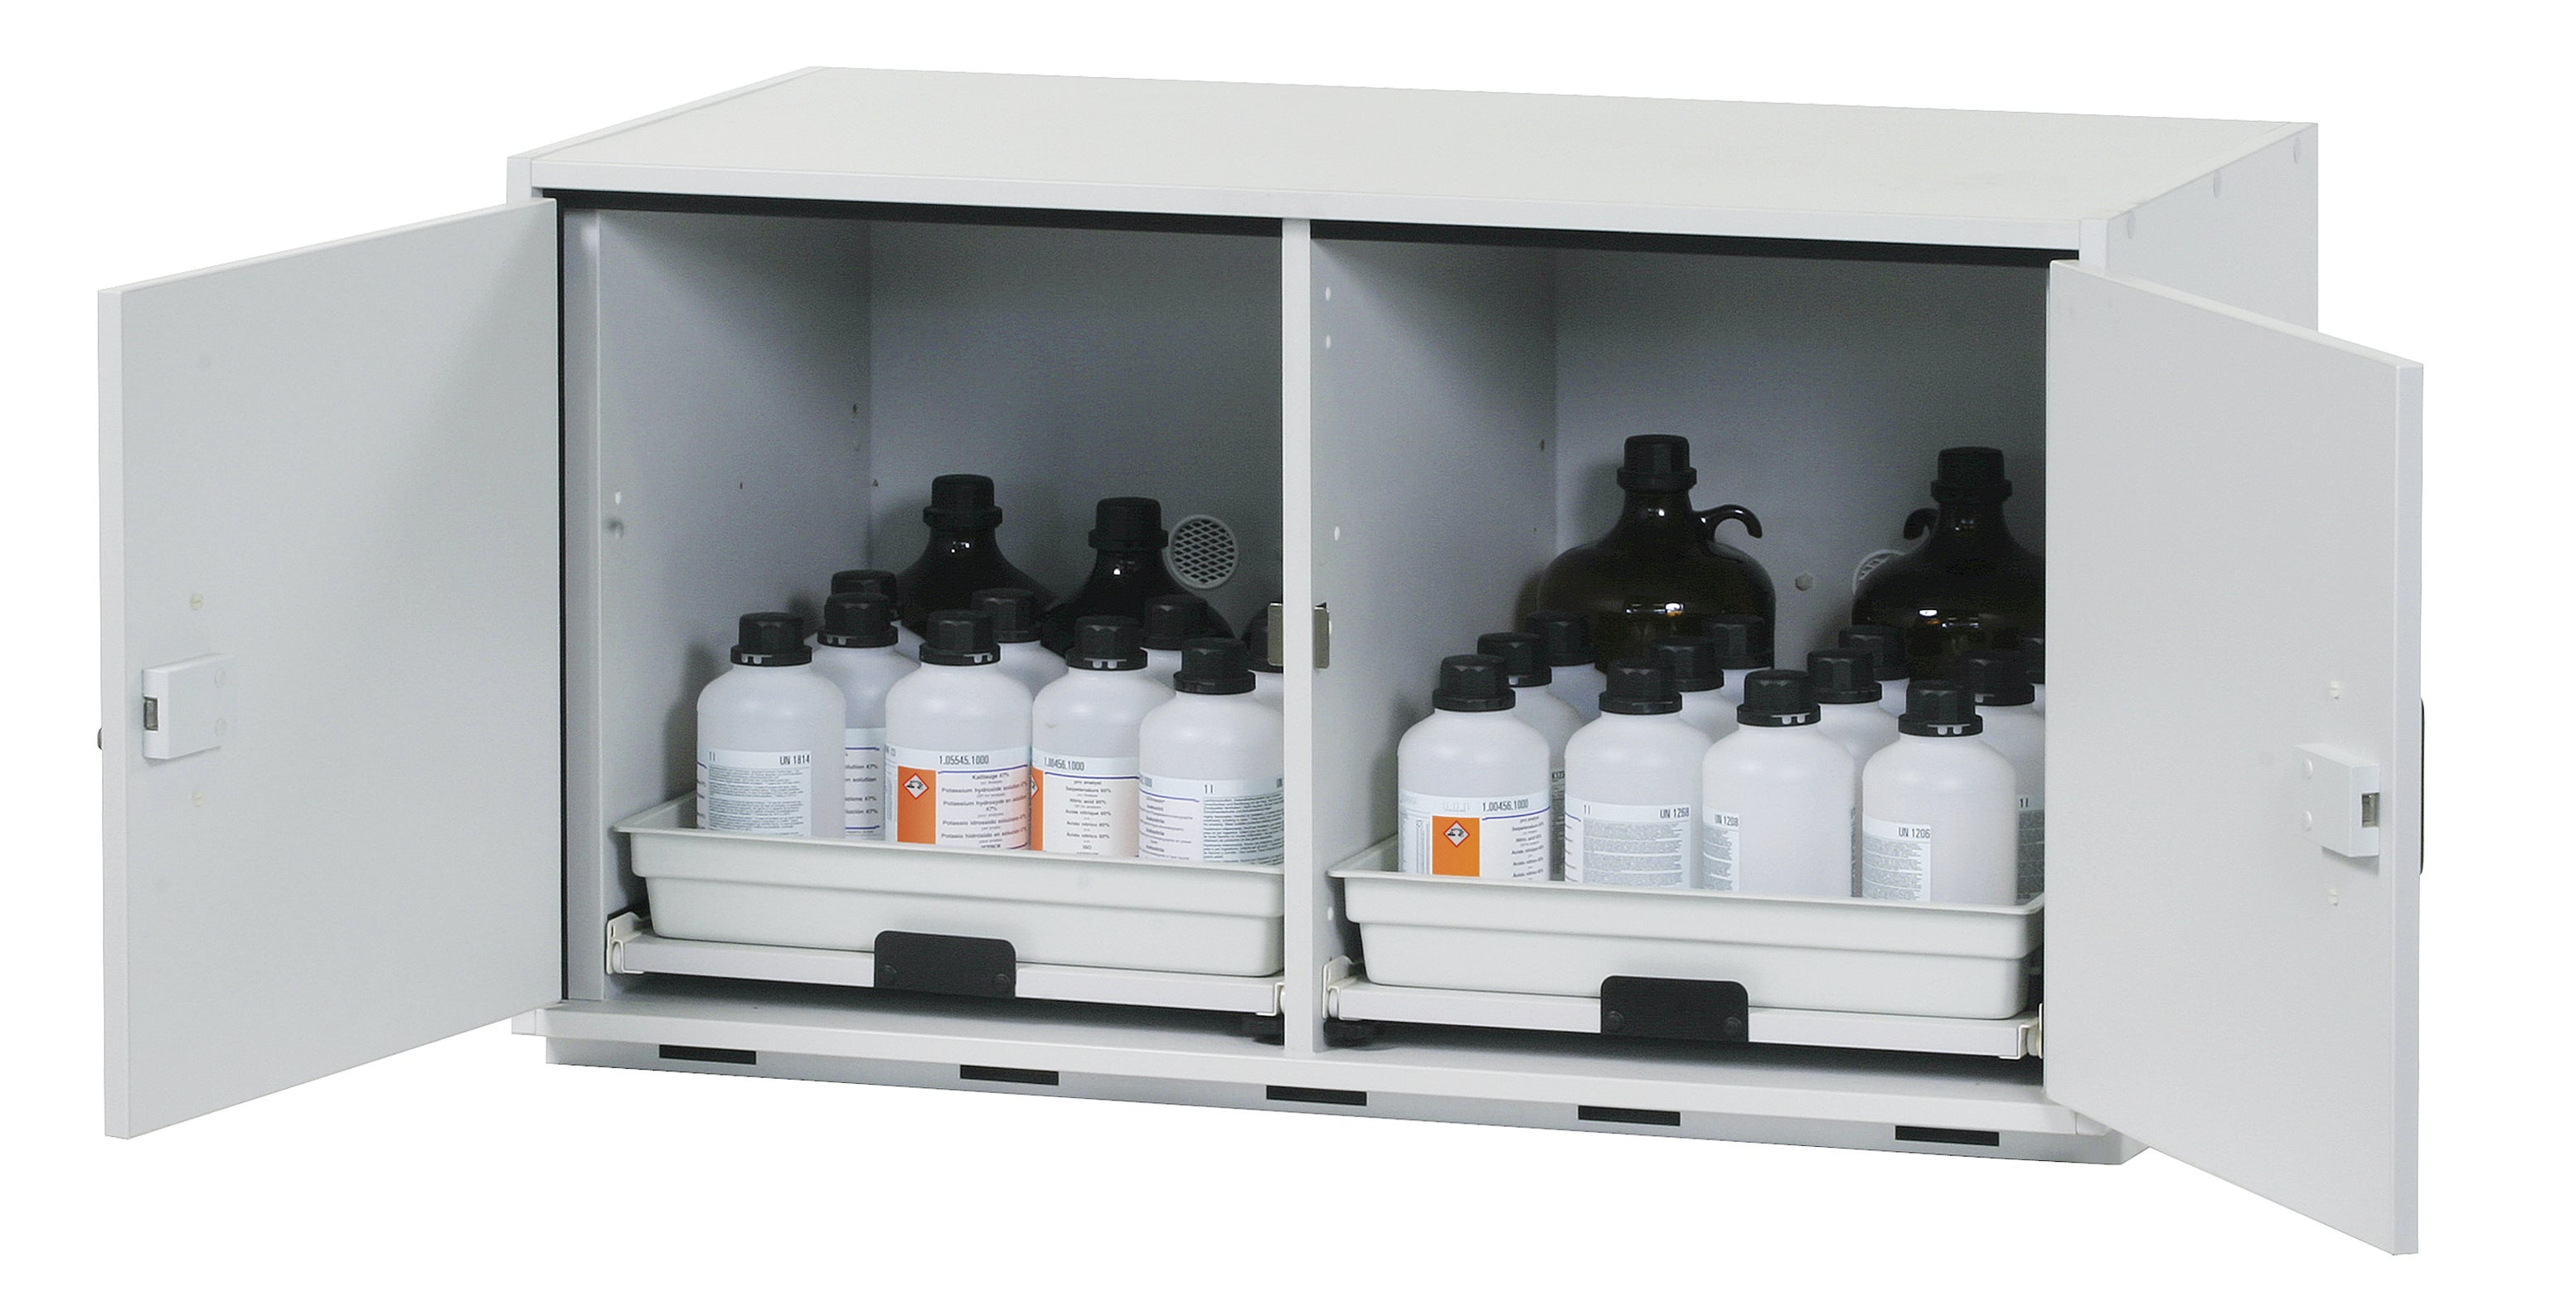 Acid and alkali base cabinet SL-CLASSIC-UB model SL.060.110.UB.2T in light gray with 2x AbZ shelf pull-out (FP plate/polypropylene)